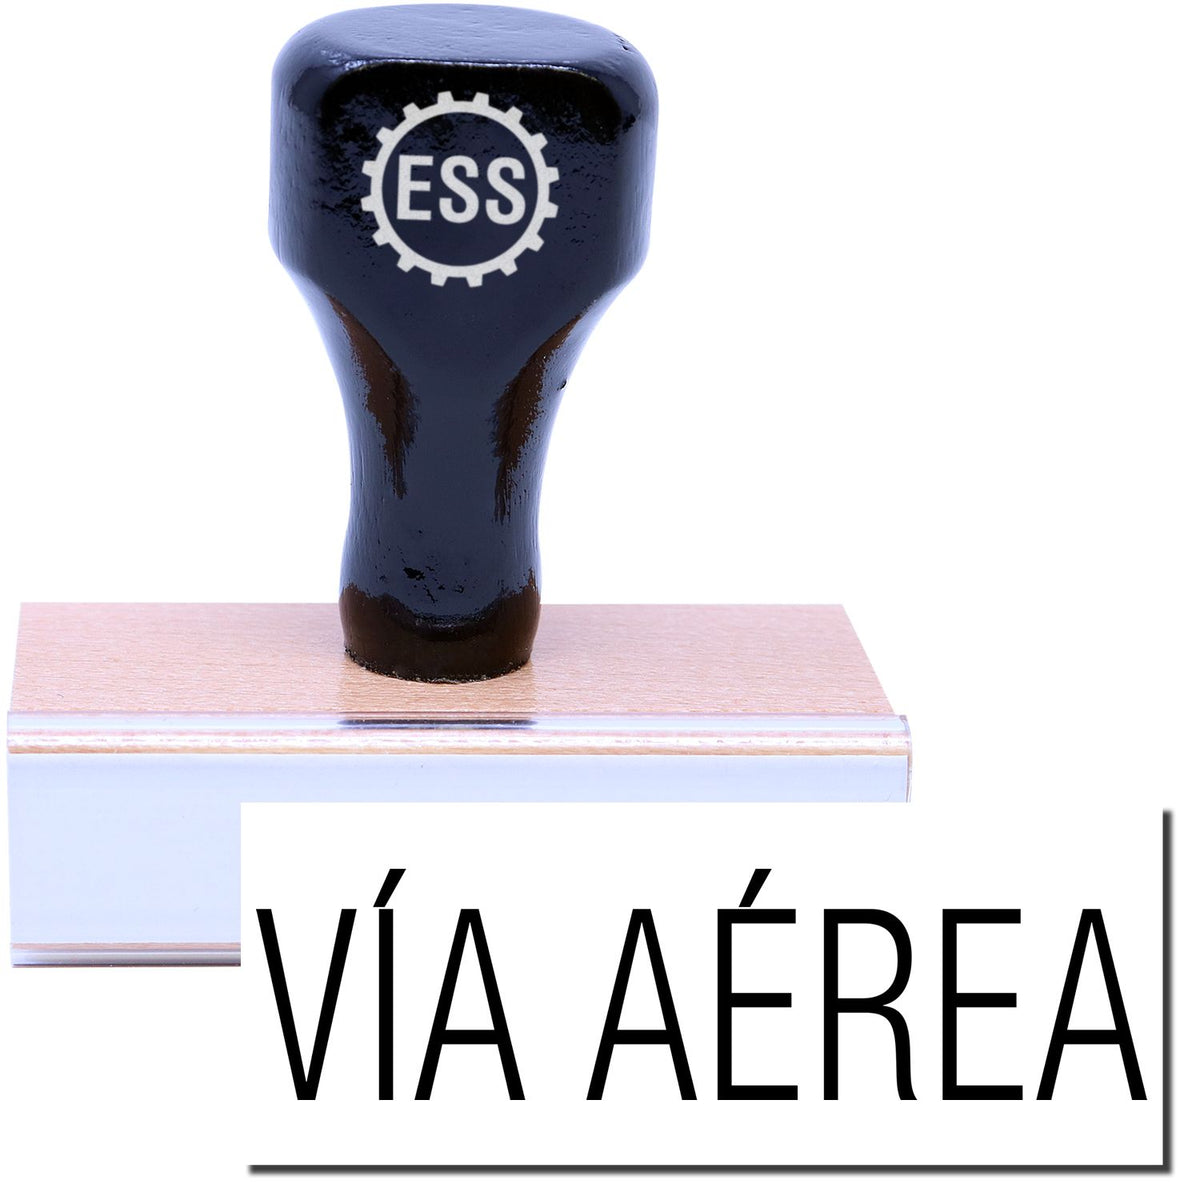 A stock office rubber stamp with a stamped image showing how the text &quot;VIA AEREA&quot; is displayed after stamping.